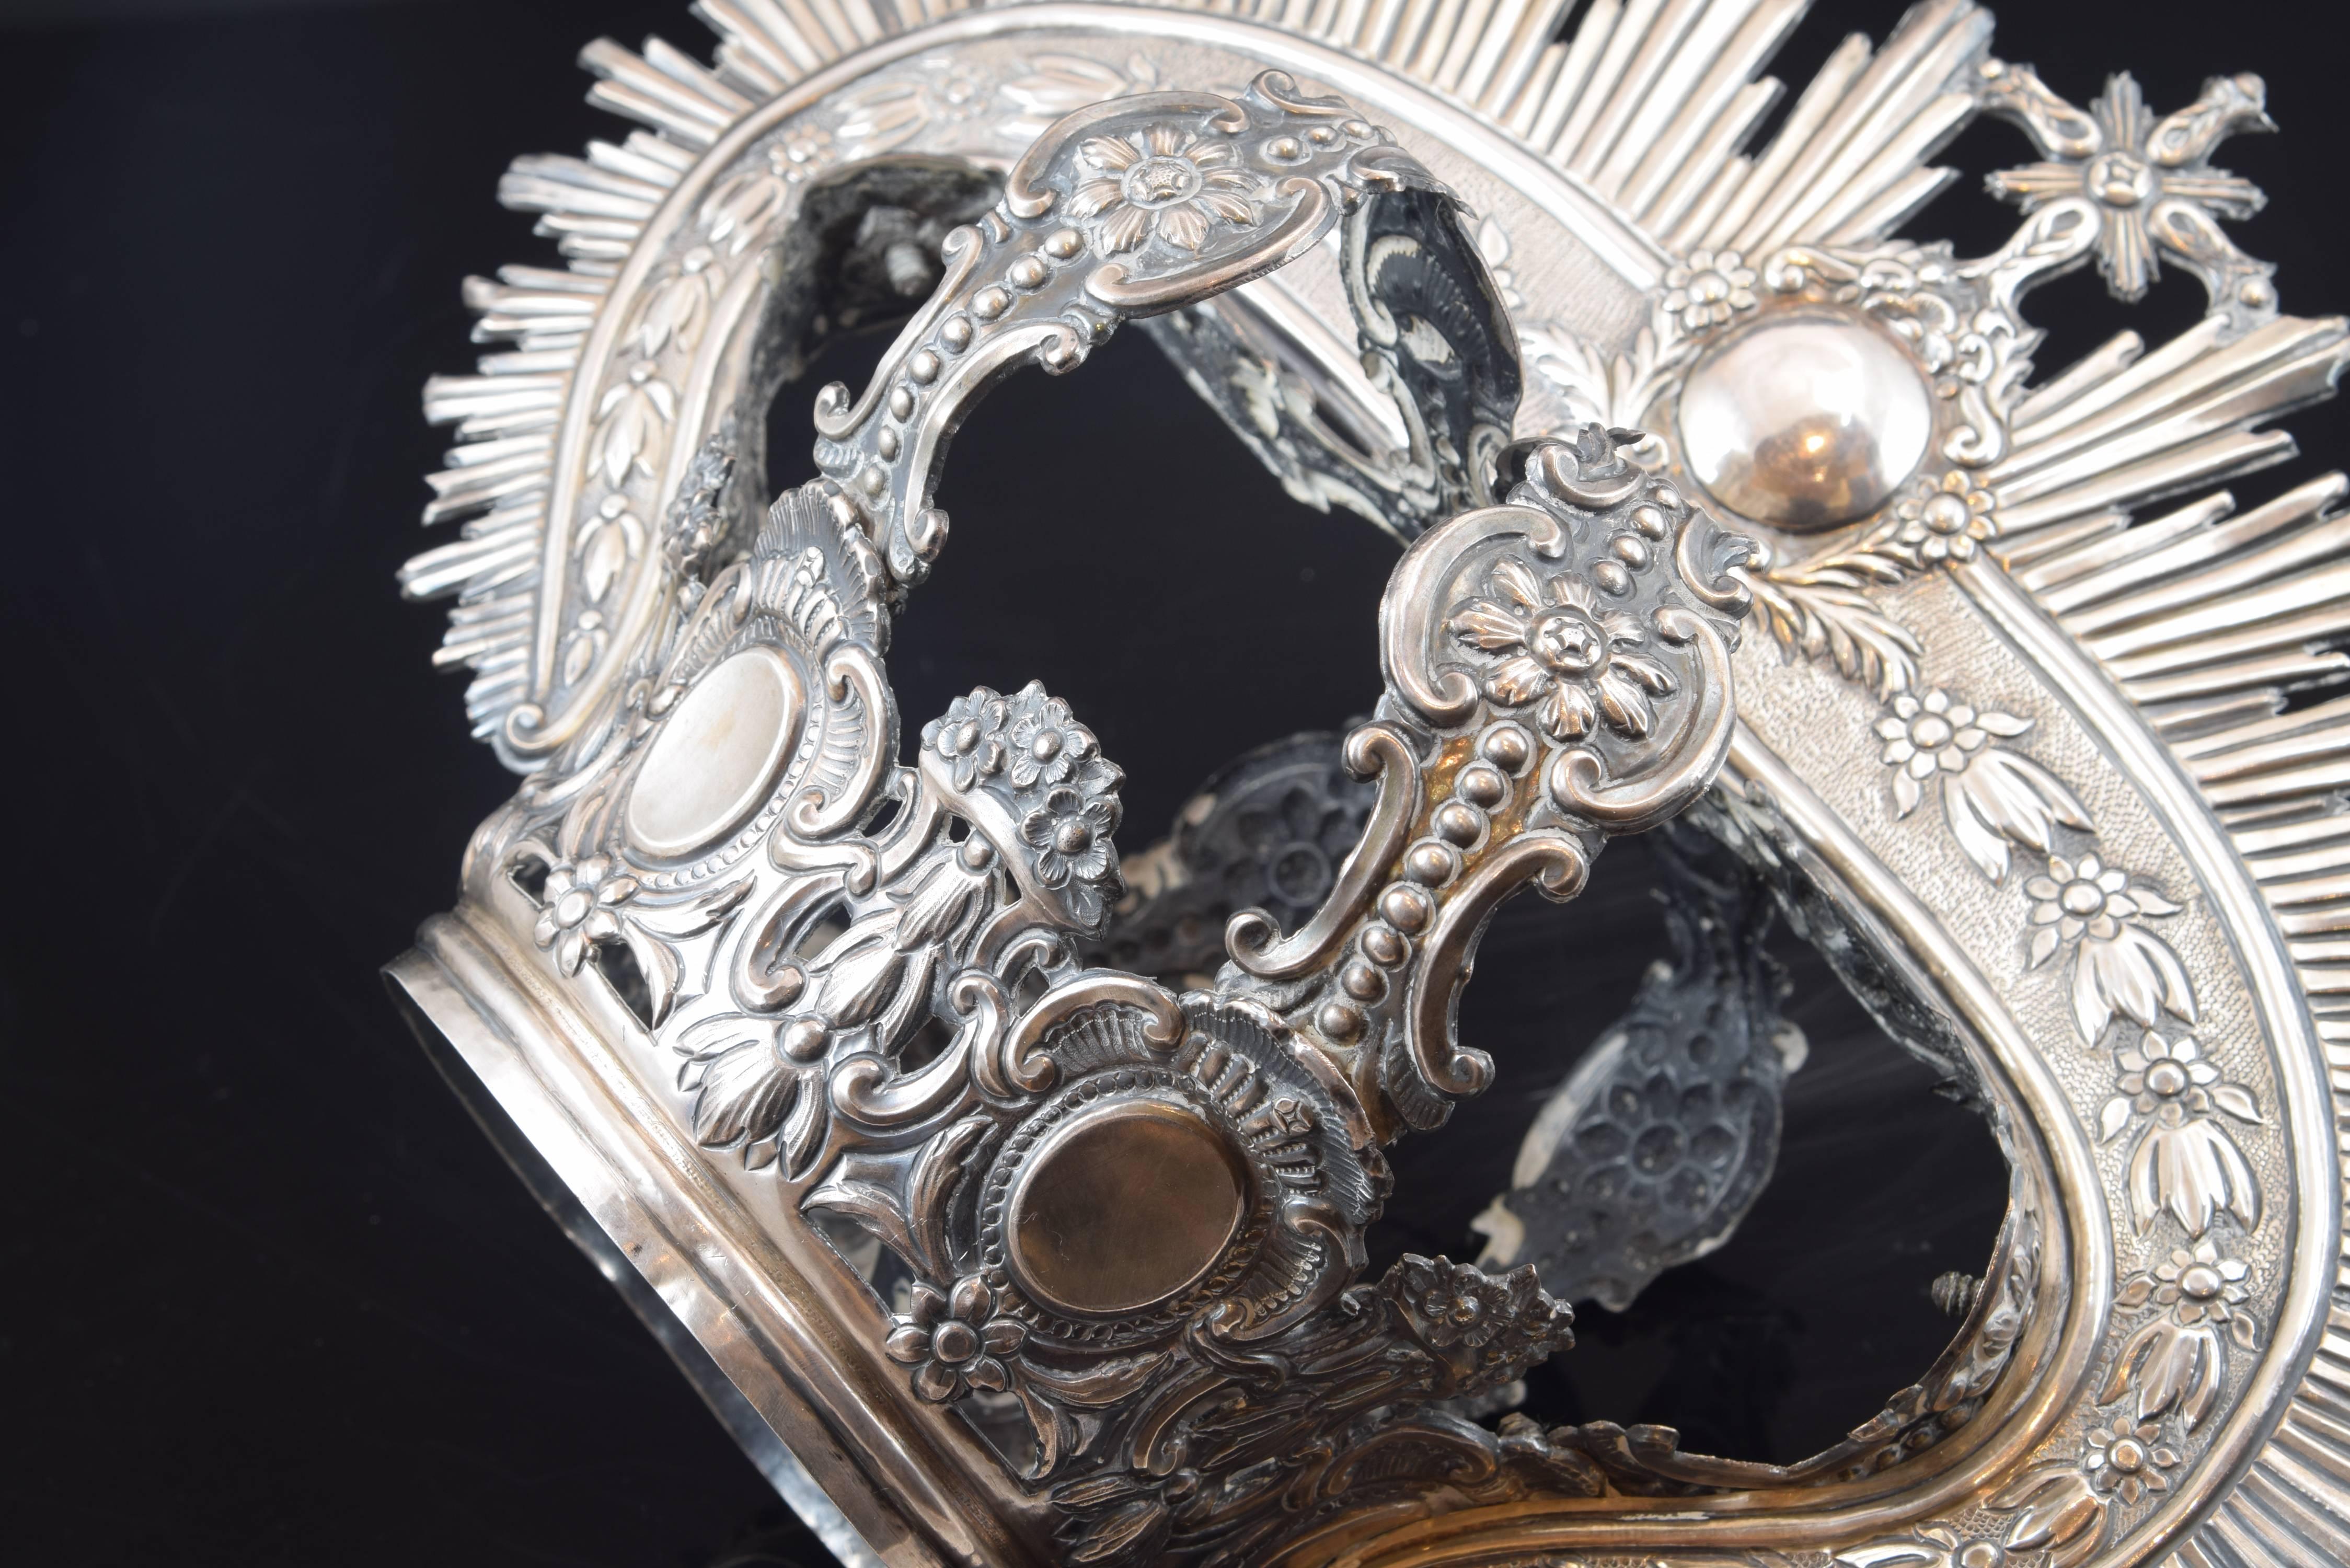 Neoclassical Crown, Silver with Hallmarks, Cordoba, Spain, 1827